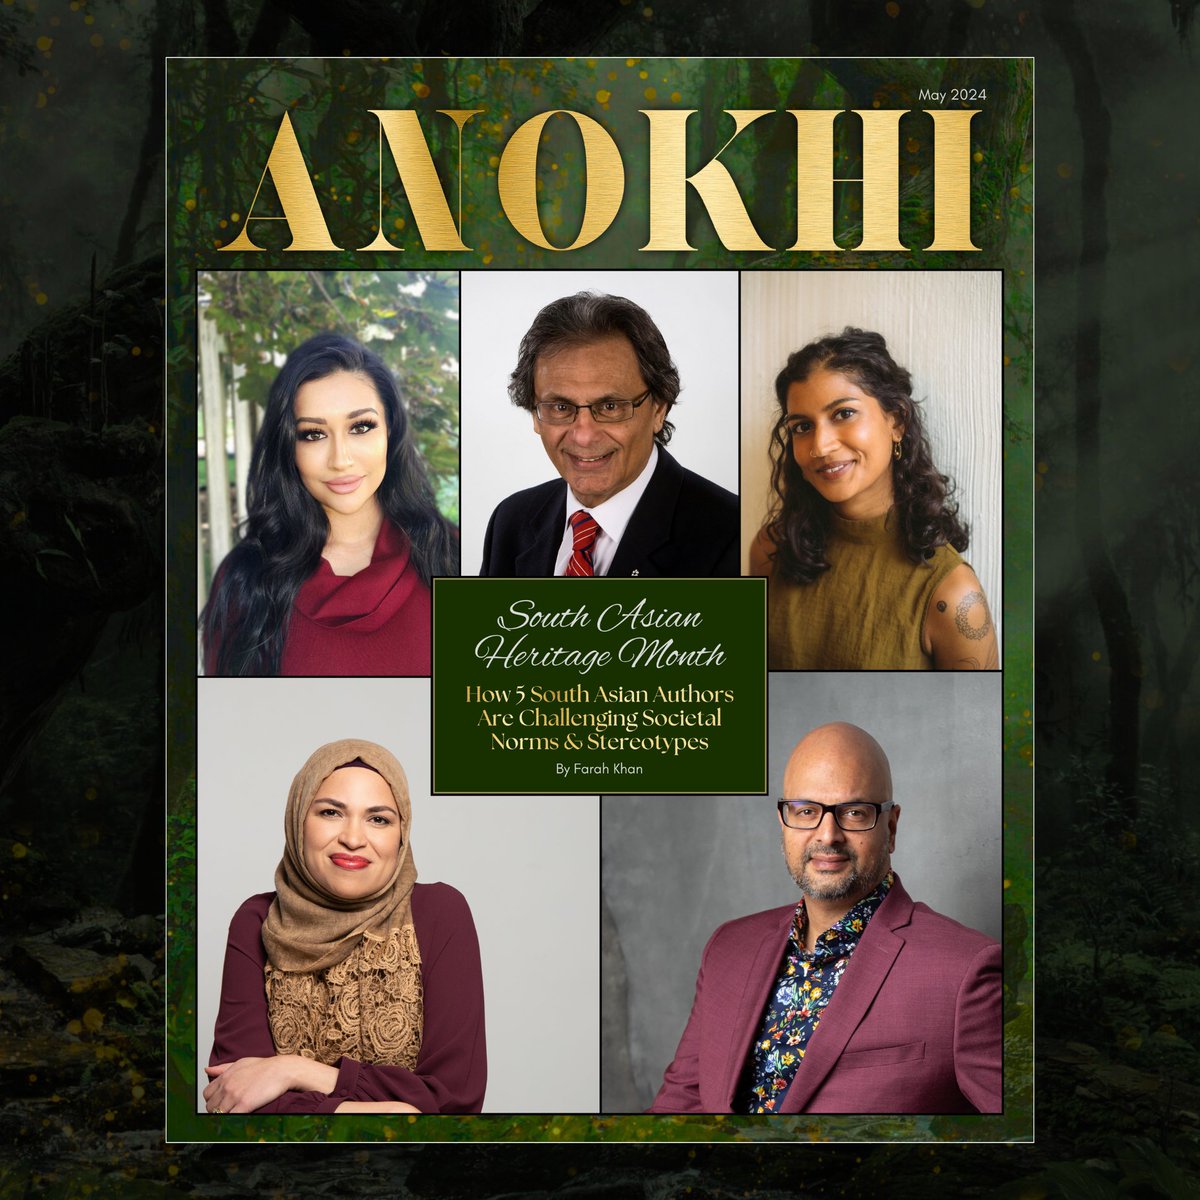 South Asian Heritage Month: How 5 South Asian Authors Are Challenging Societal Norms & Stereotypes

✍️ Farah Khan

—
🔴 FULL STORY: anokhilife.com/south-asian-he…
—

#bibliobash #bibliobash24 #southasianheritagemonth #southasian #southasianauthors #coverstory #anokhilife